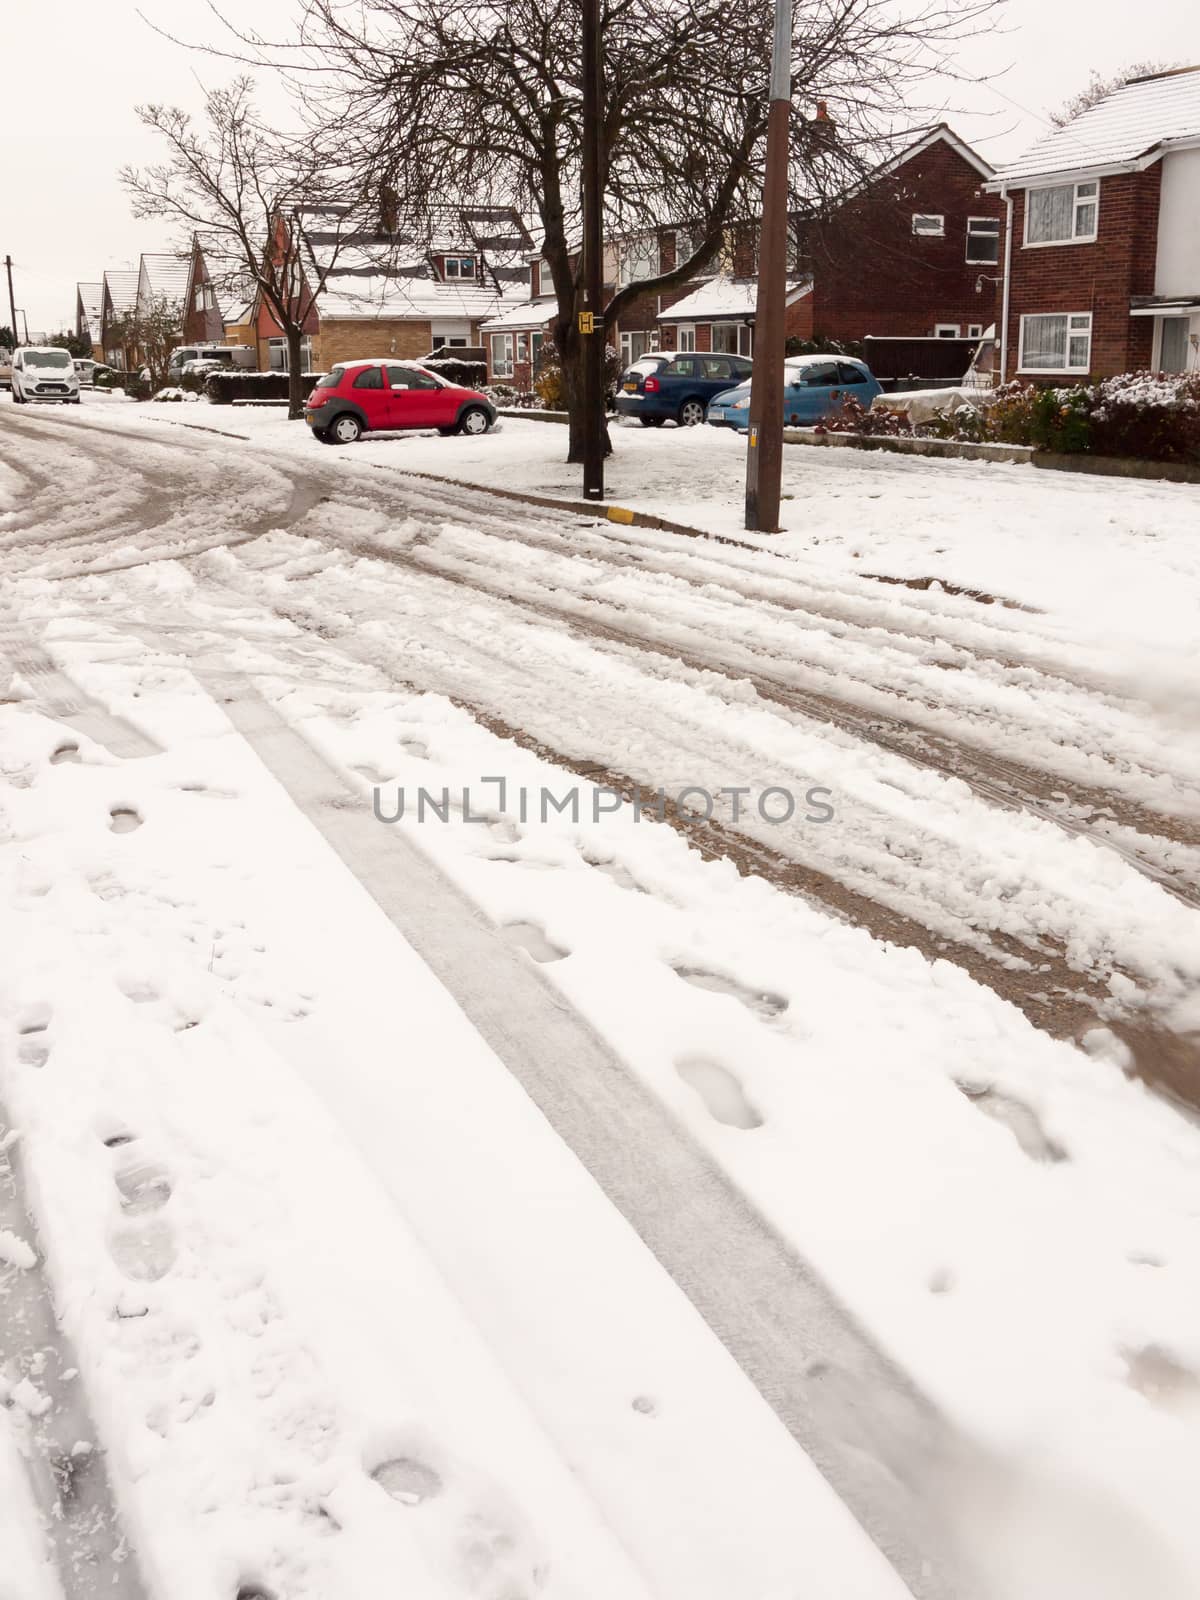 snow covered street road with tire tracks leading through villag by callumrc